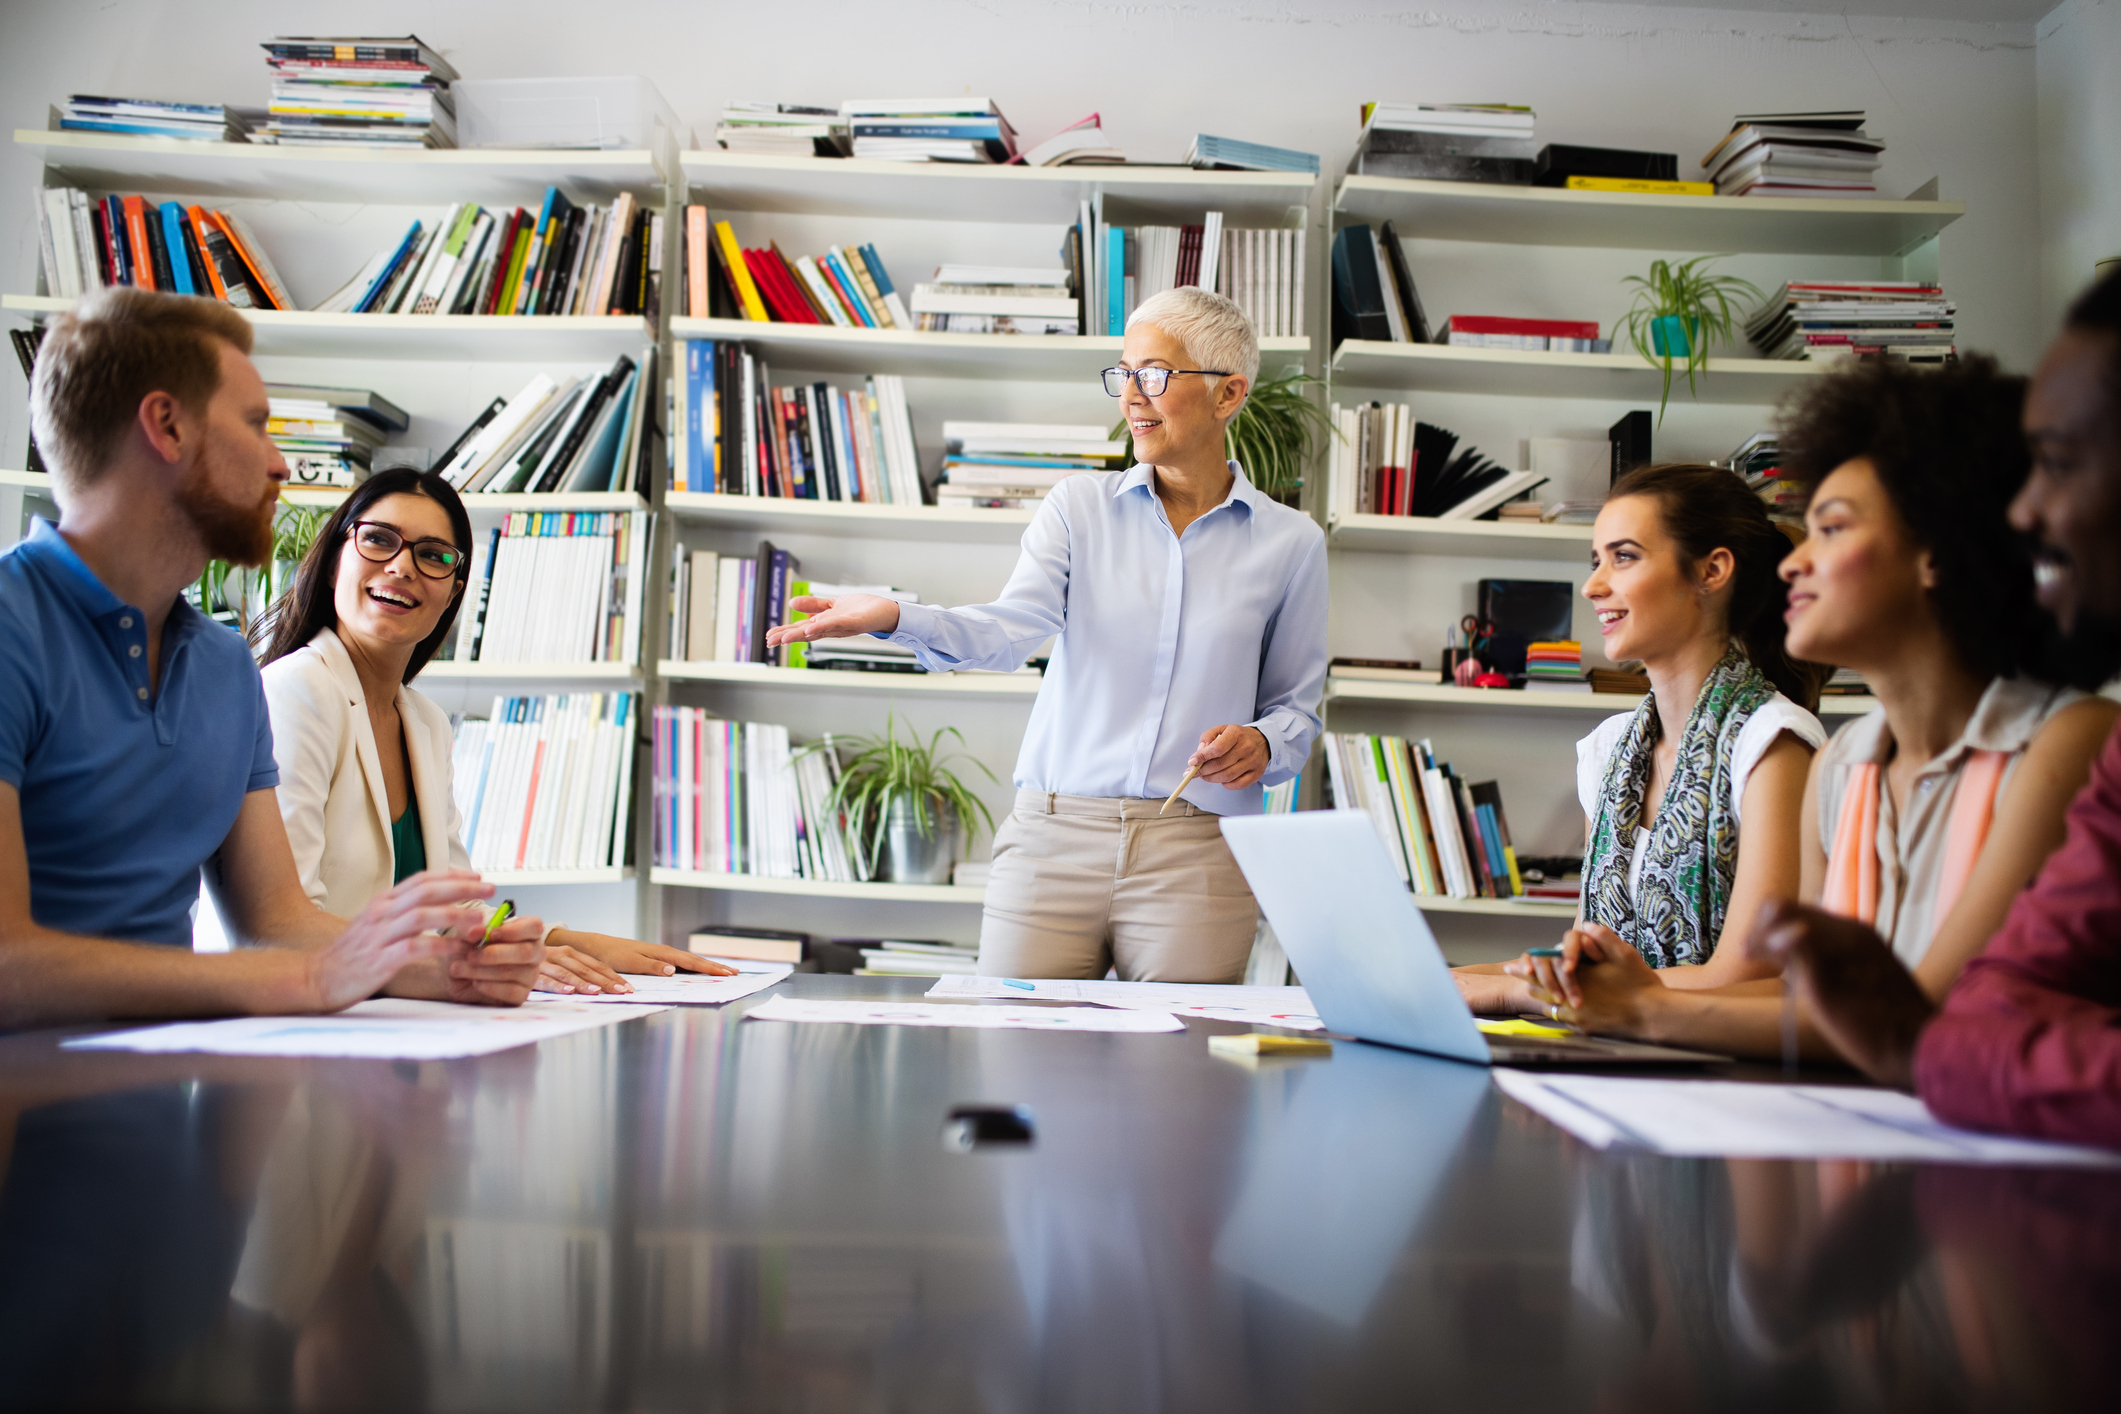 Stock image of team meeting; older woman is standing at the head of the table explaining something to five individuals around the table.